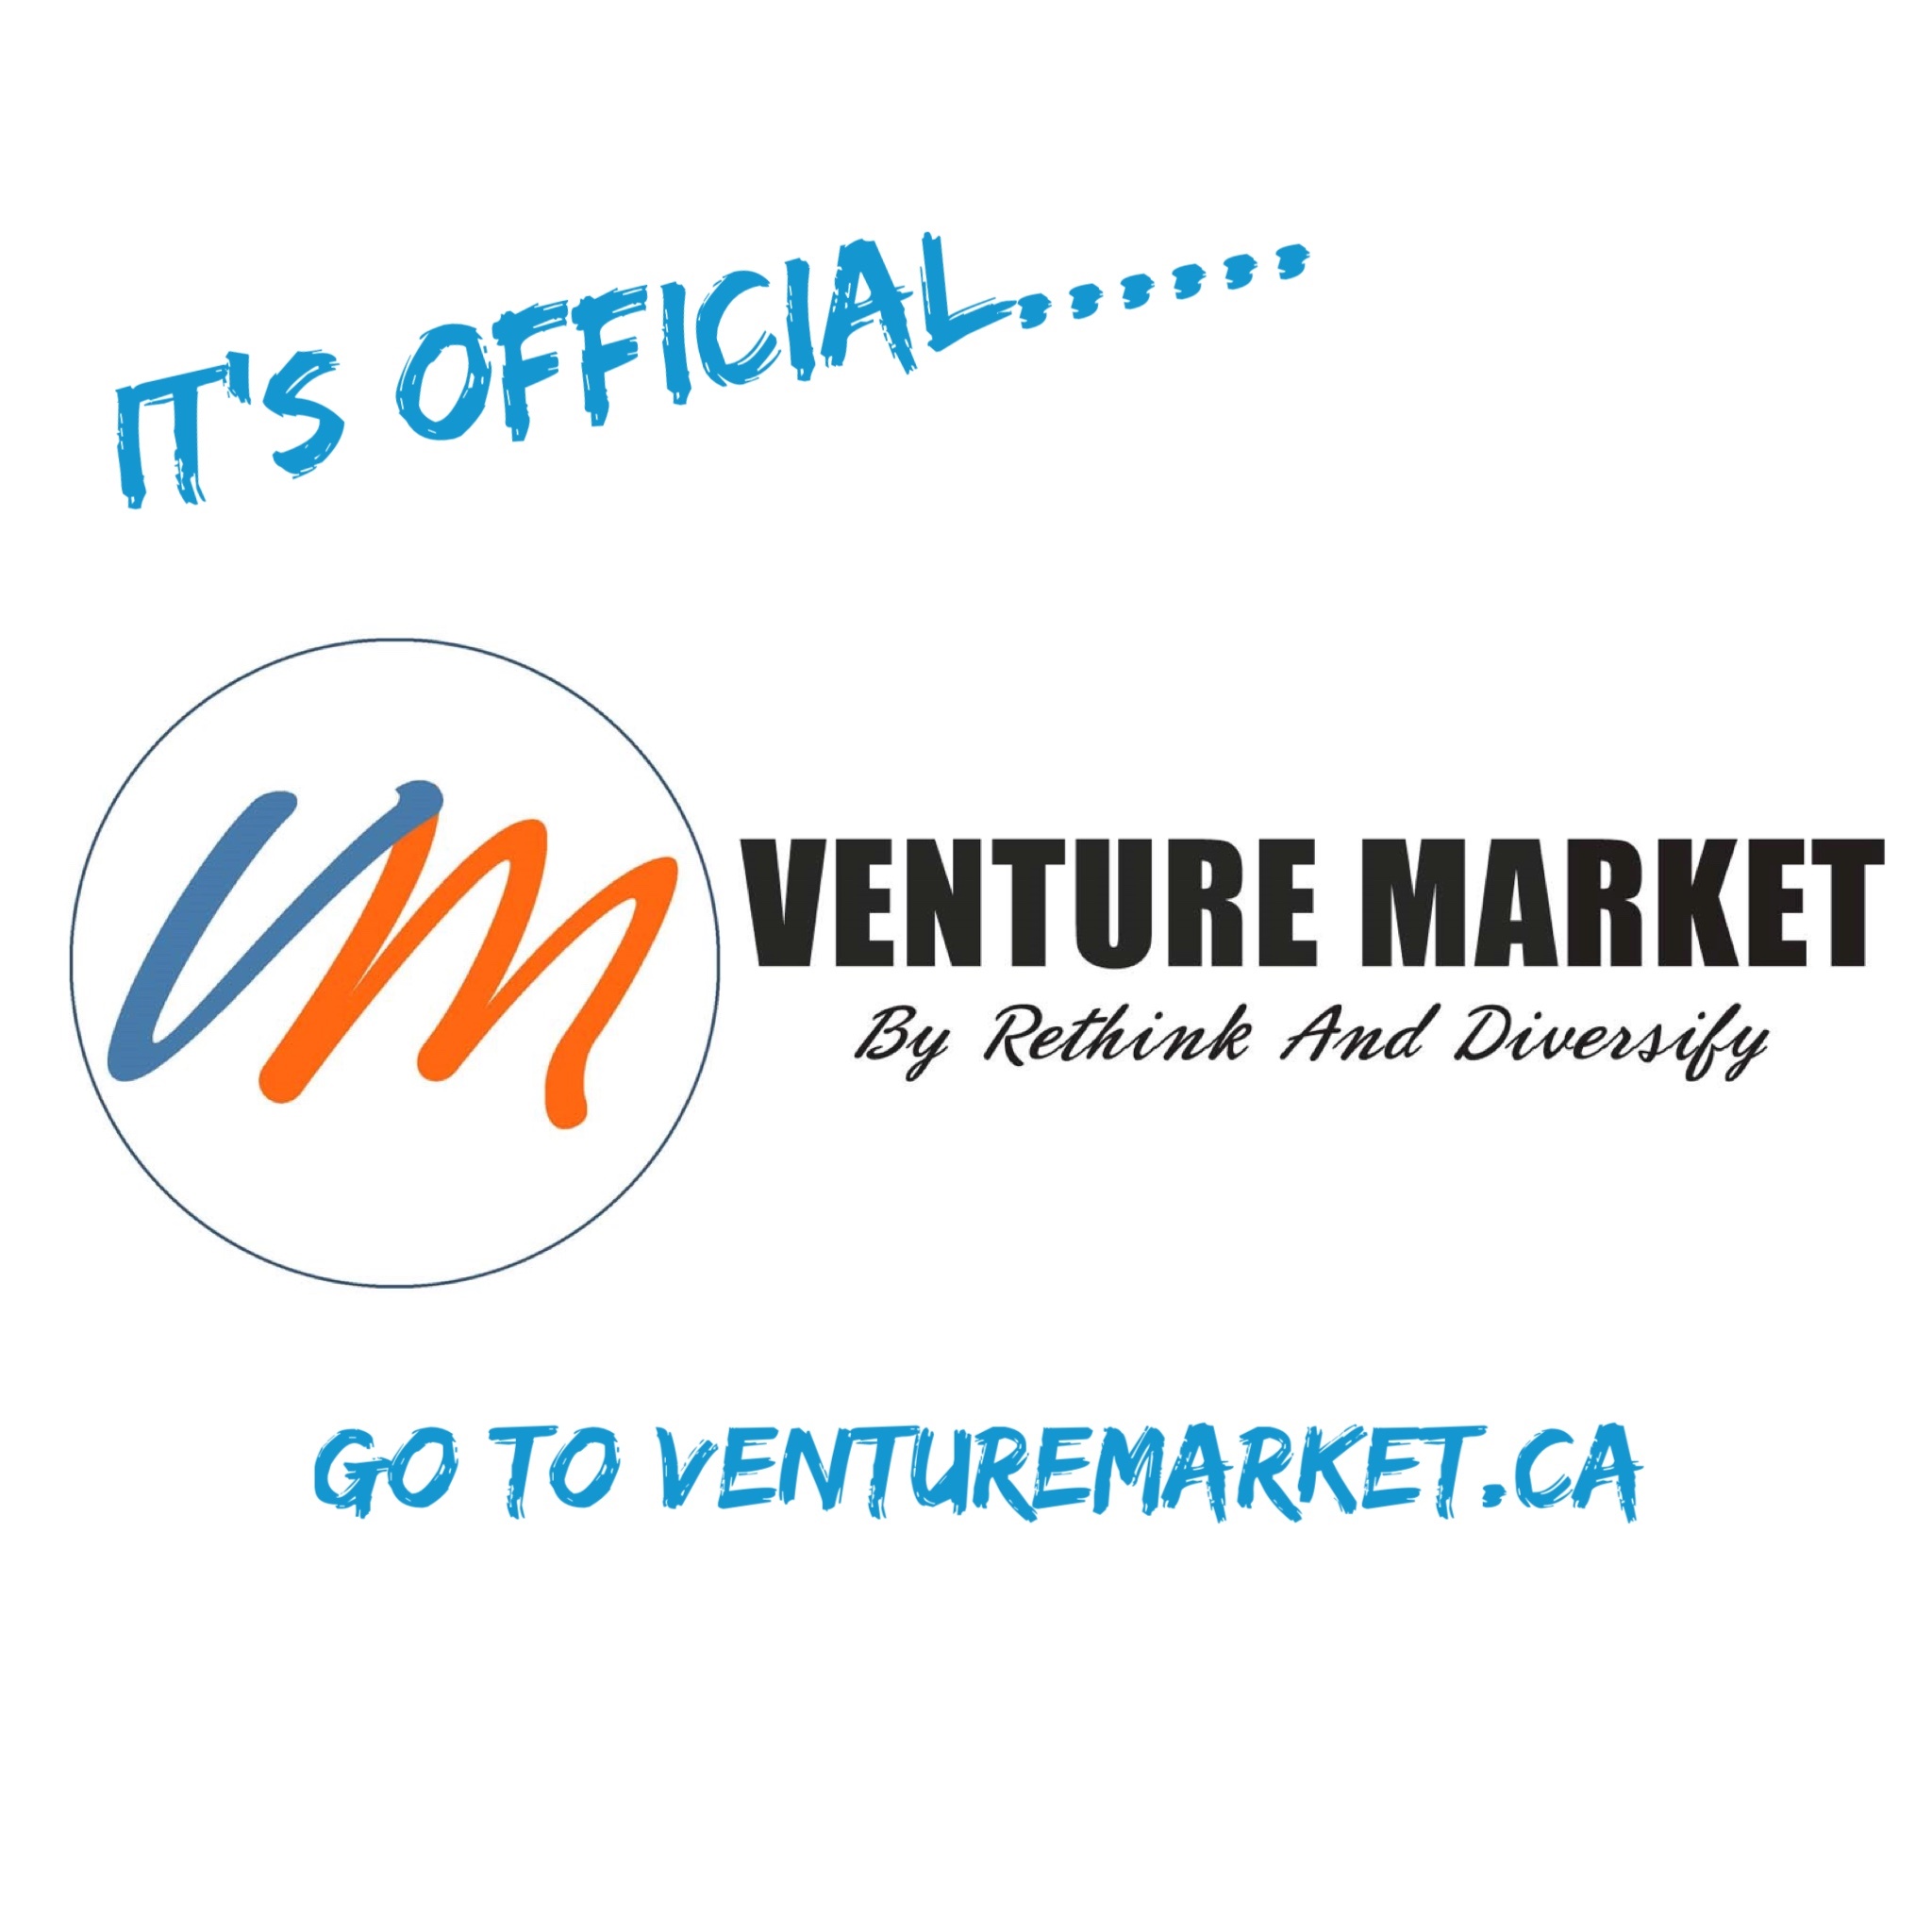 Press Release – Venture Market by Rethink and Diversify